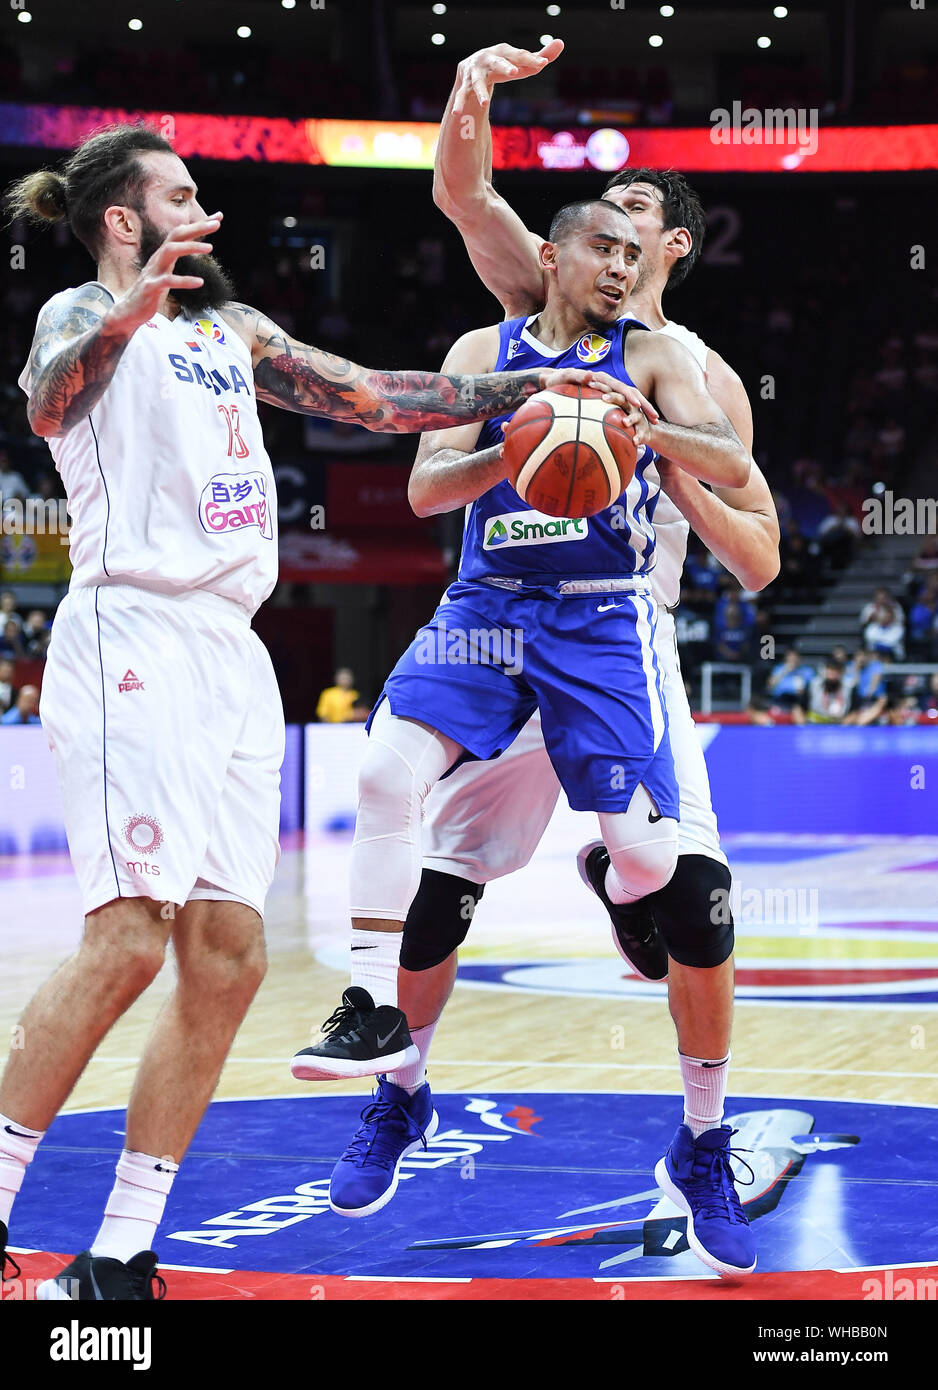 (190902) -- FOSHAN, Sept. 2, 2019 (Xinhua) -- Paul John Dalistan (front R) of the Philippines grabs the ball during the group D match between Serbia and the Philippines at the 2019 FIBA World Cup in Foshan, south China's Guangdong Province, Sept. 2, 2019. (Xinhua/Xue Yubin) Stock Photo